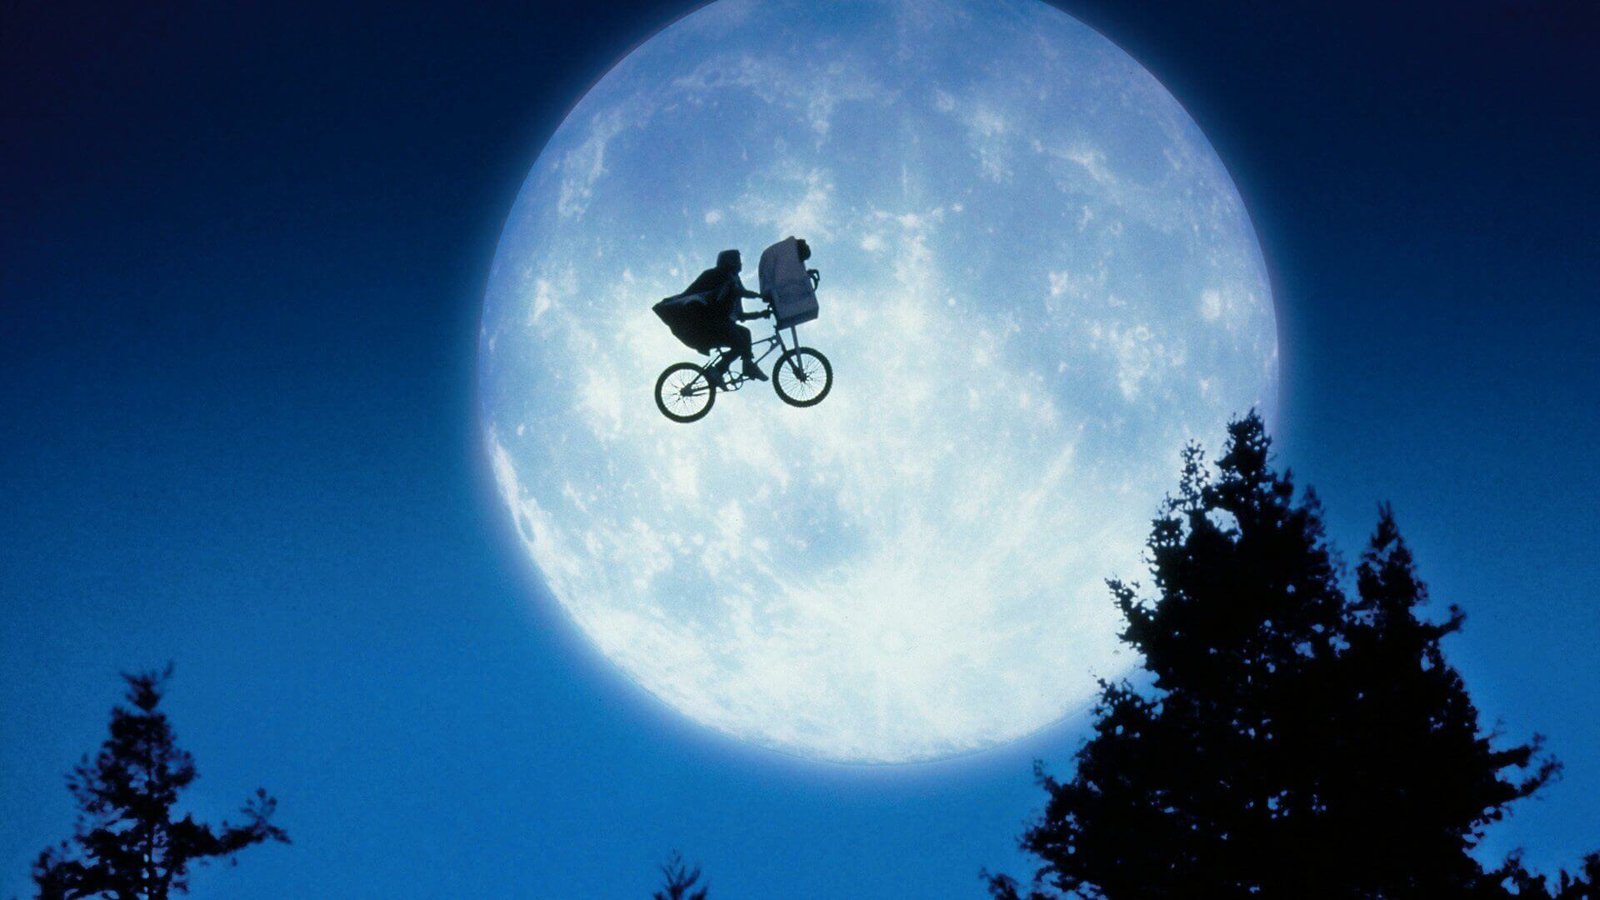 “E.T. The Extra-Terrestrial IMAX Re-Release”